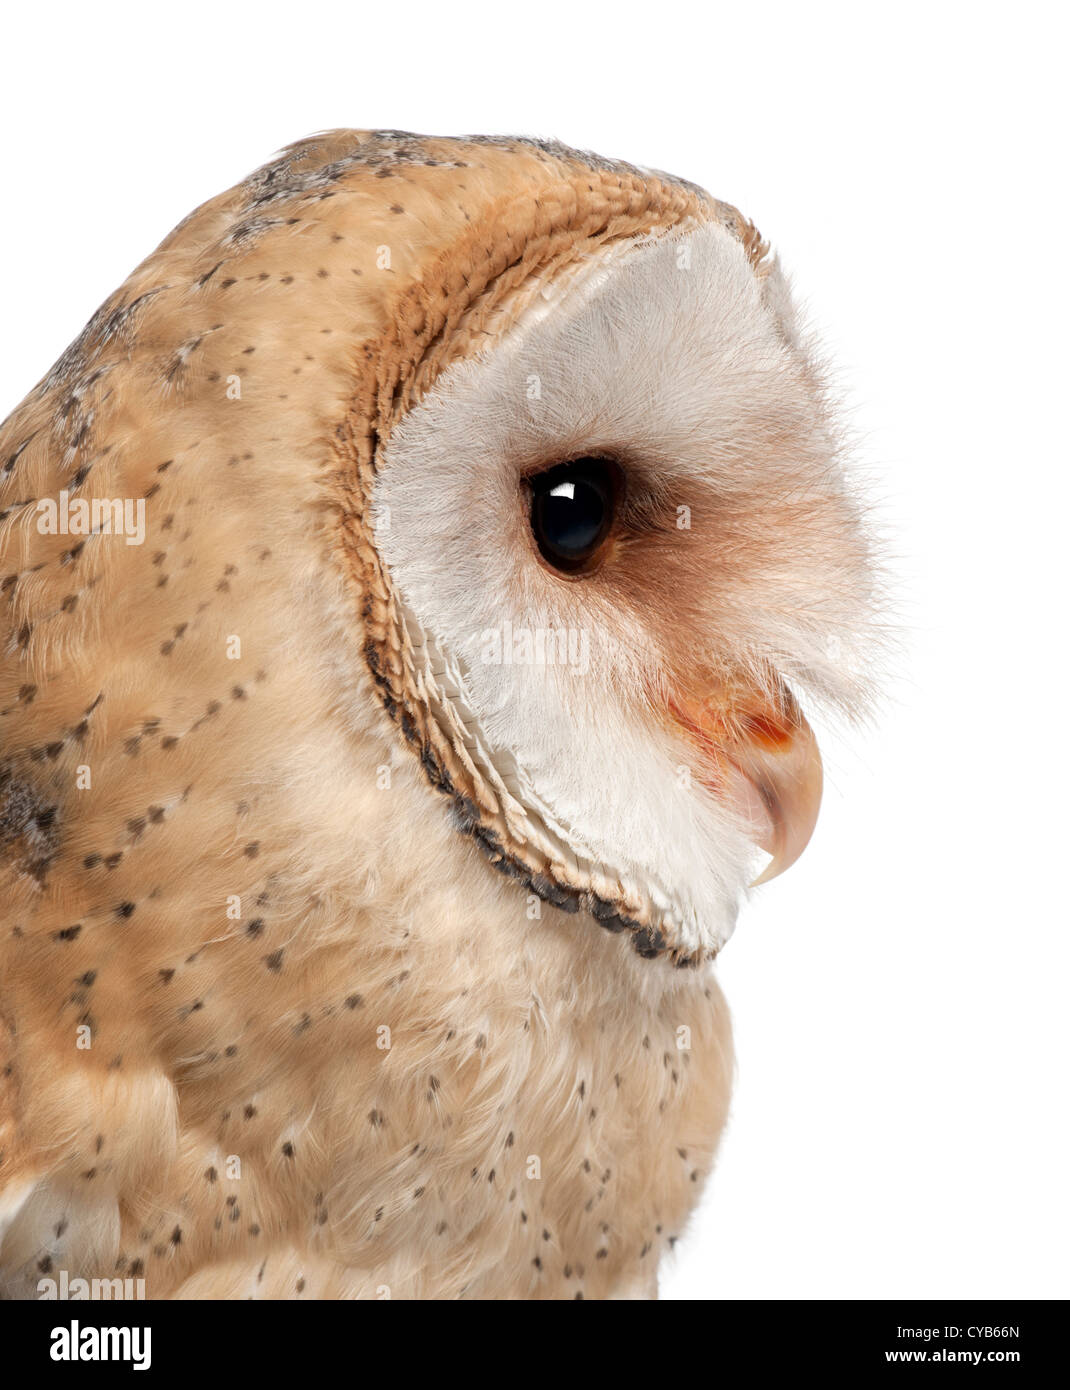 Close up of Barn Owl, Tyto alba, 4 months old, against white background Stock Photo